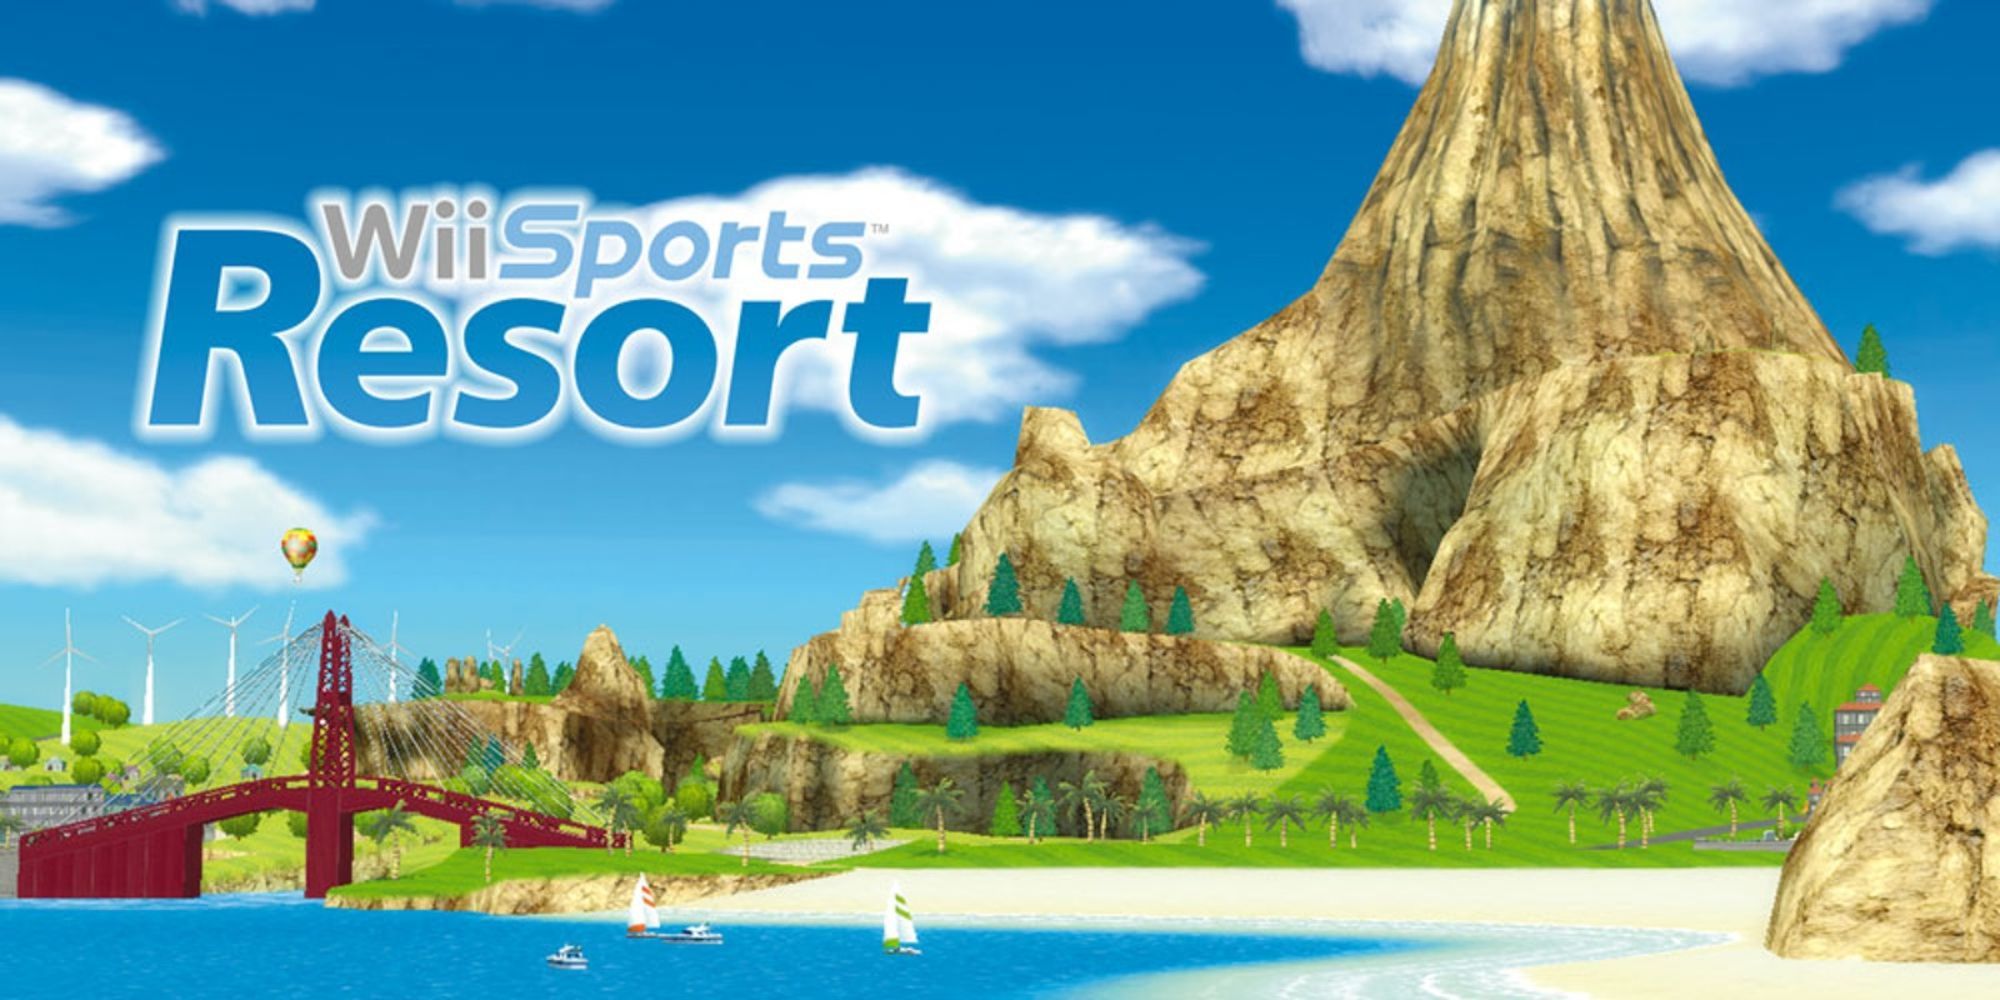 Wii Sports Resort Logo With A Mountain And Beach